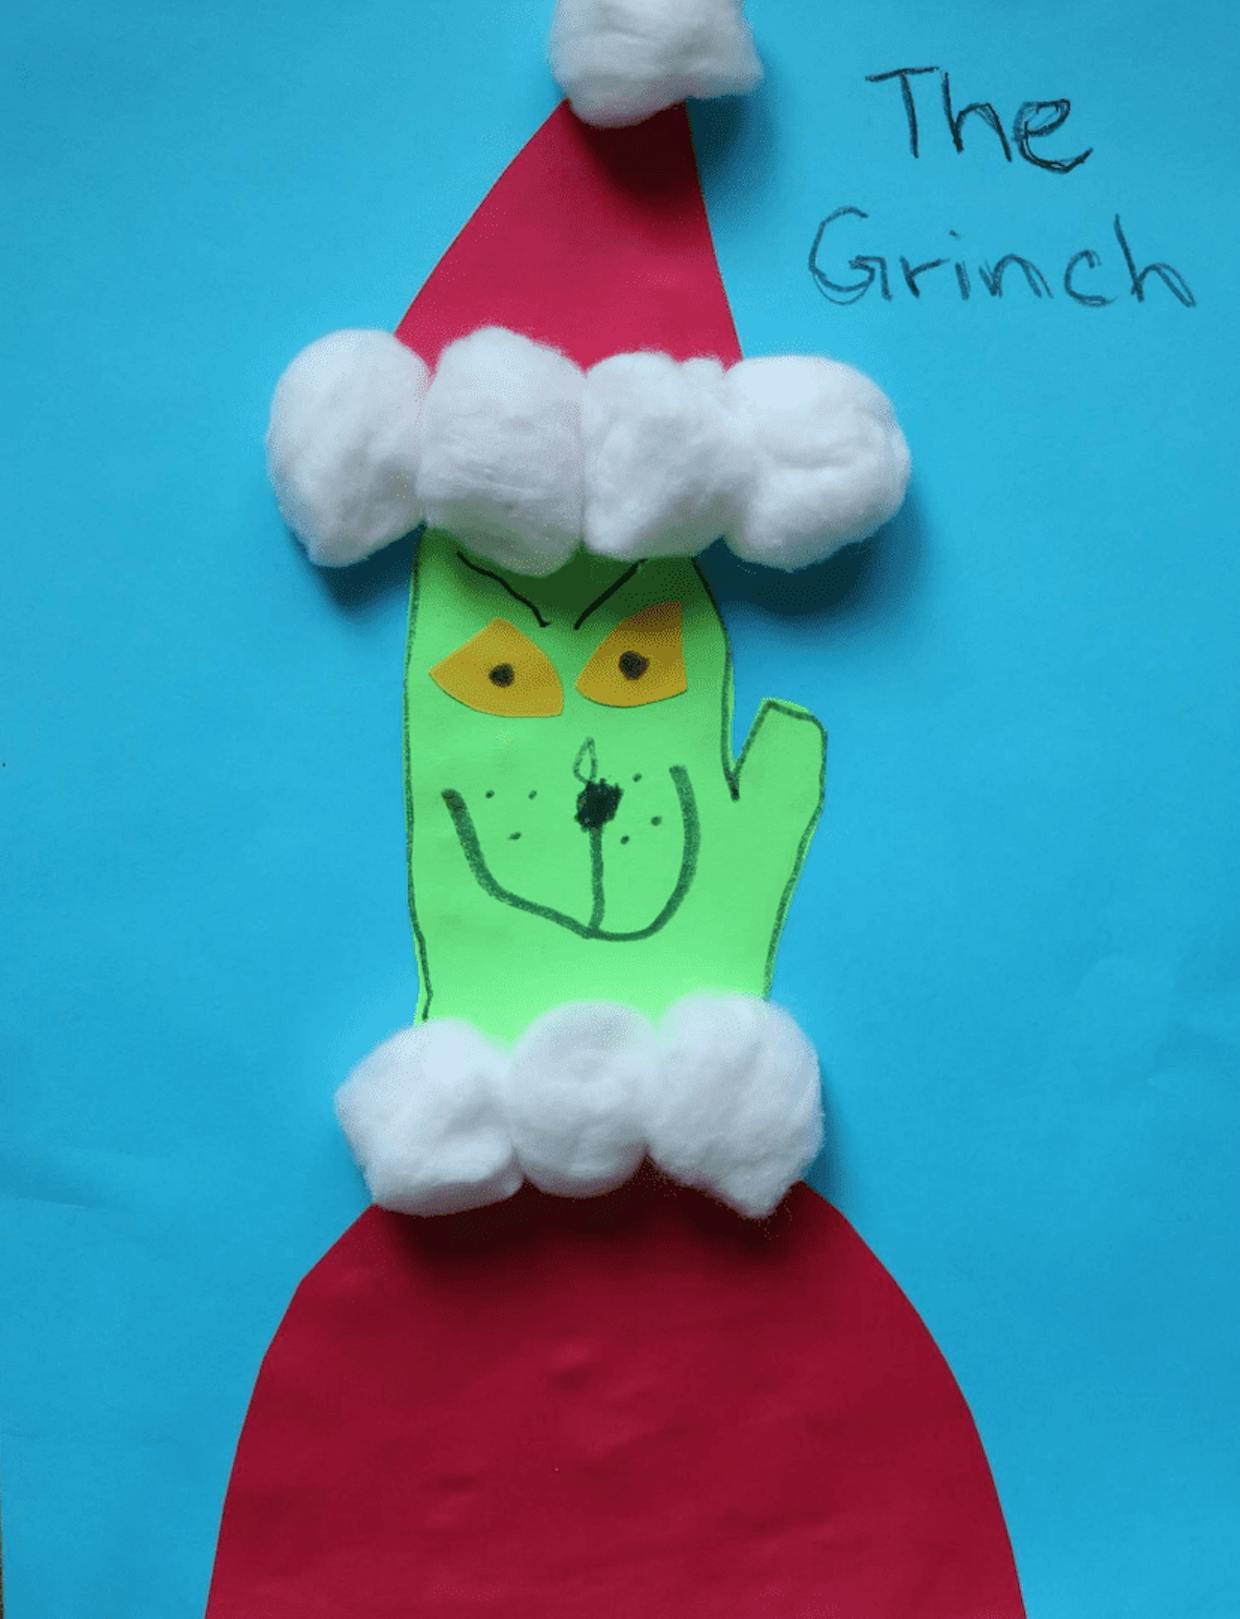 🎶 You're a mean one...Mr. Grinch 🎶 😅 The face is my son's traced handprint 😊🙌